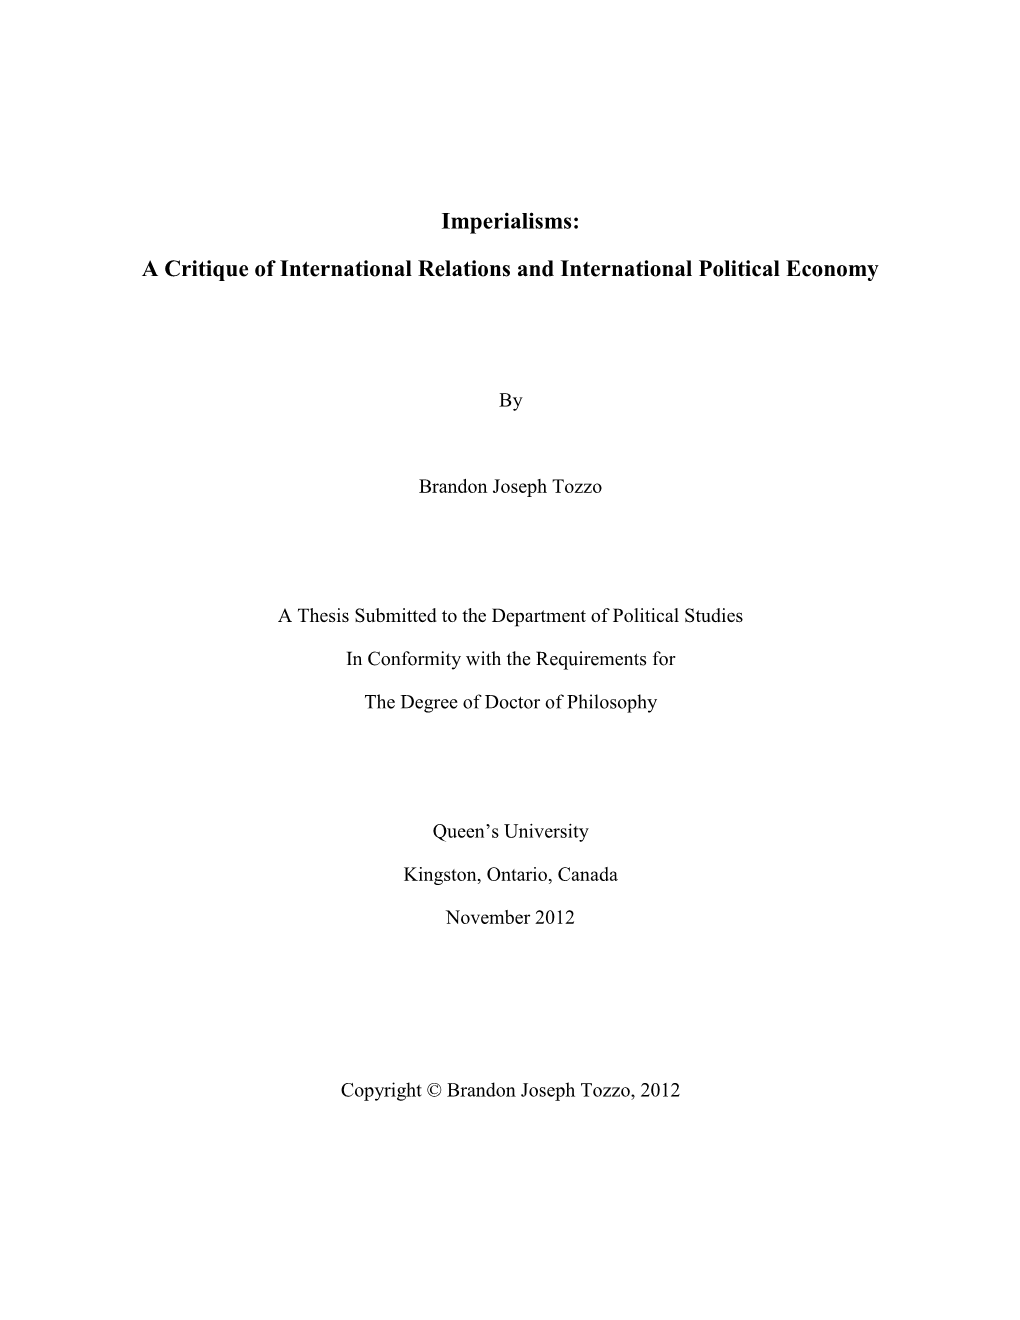 A Critique of International Relations and International Political Economy